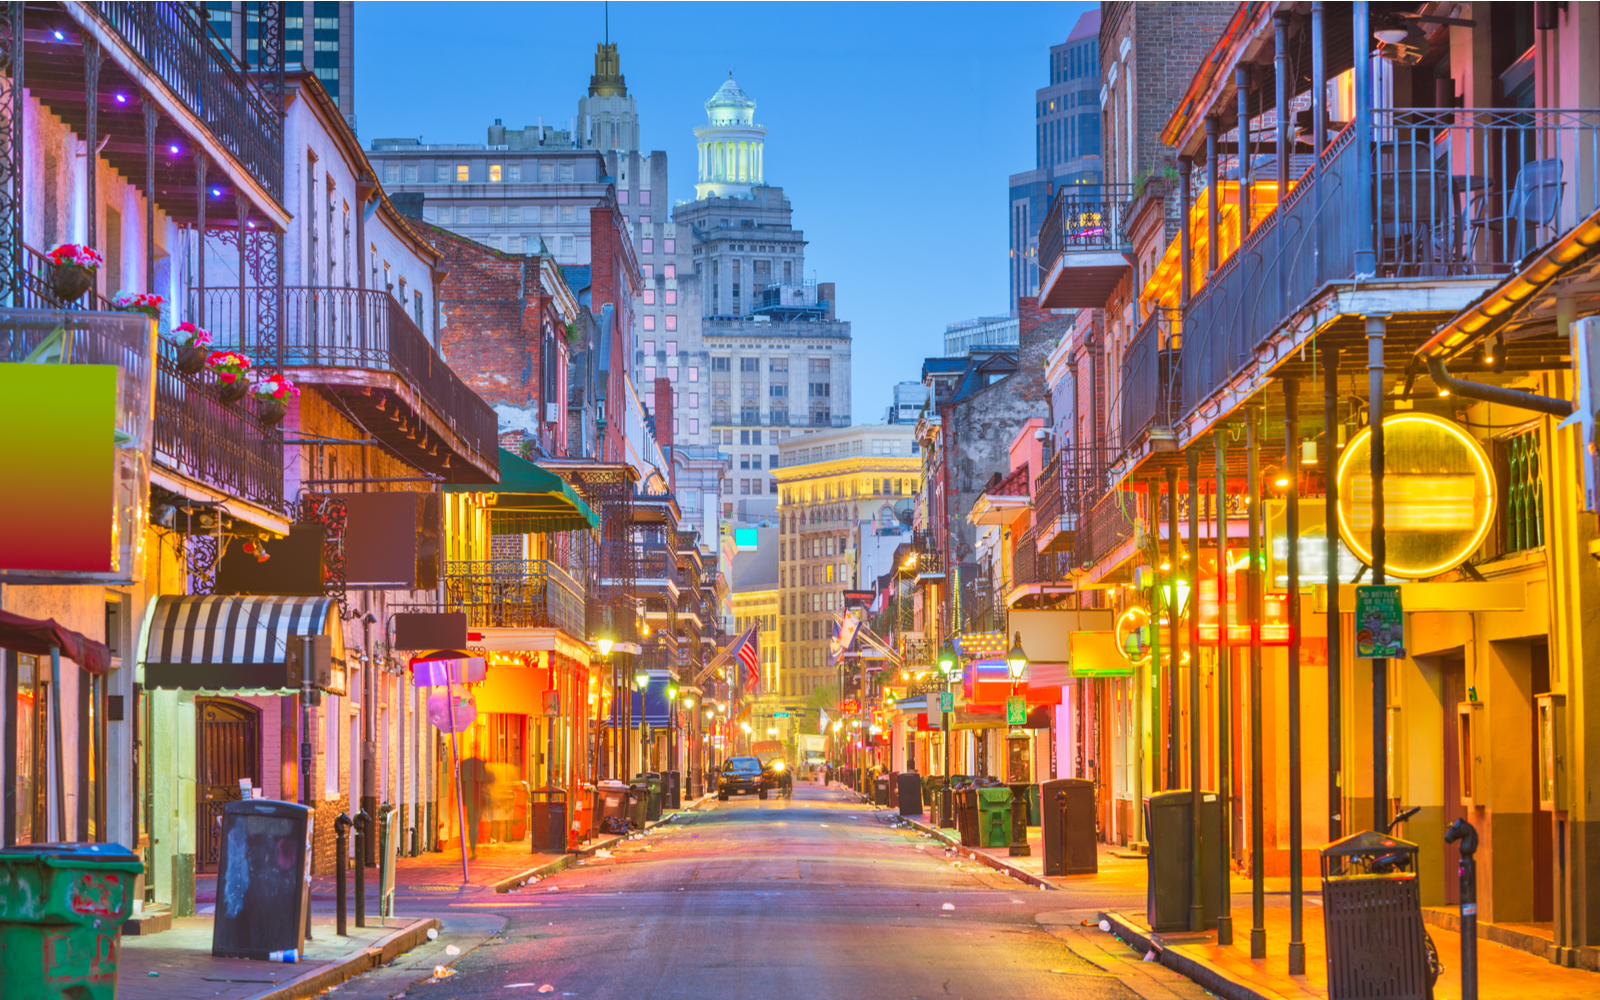 Snap of Bourbon St pictured during the best time to visit New Orleans